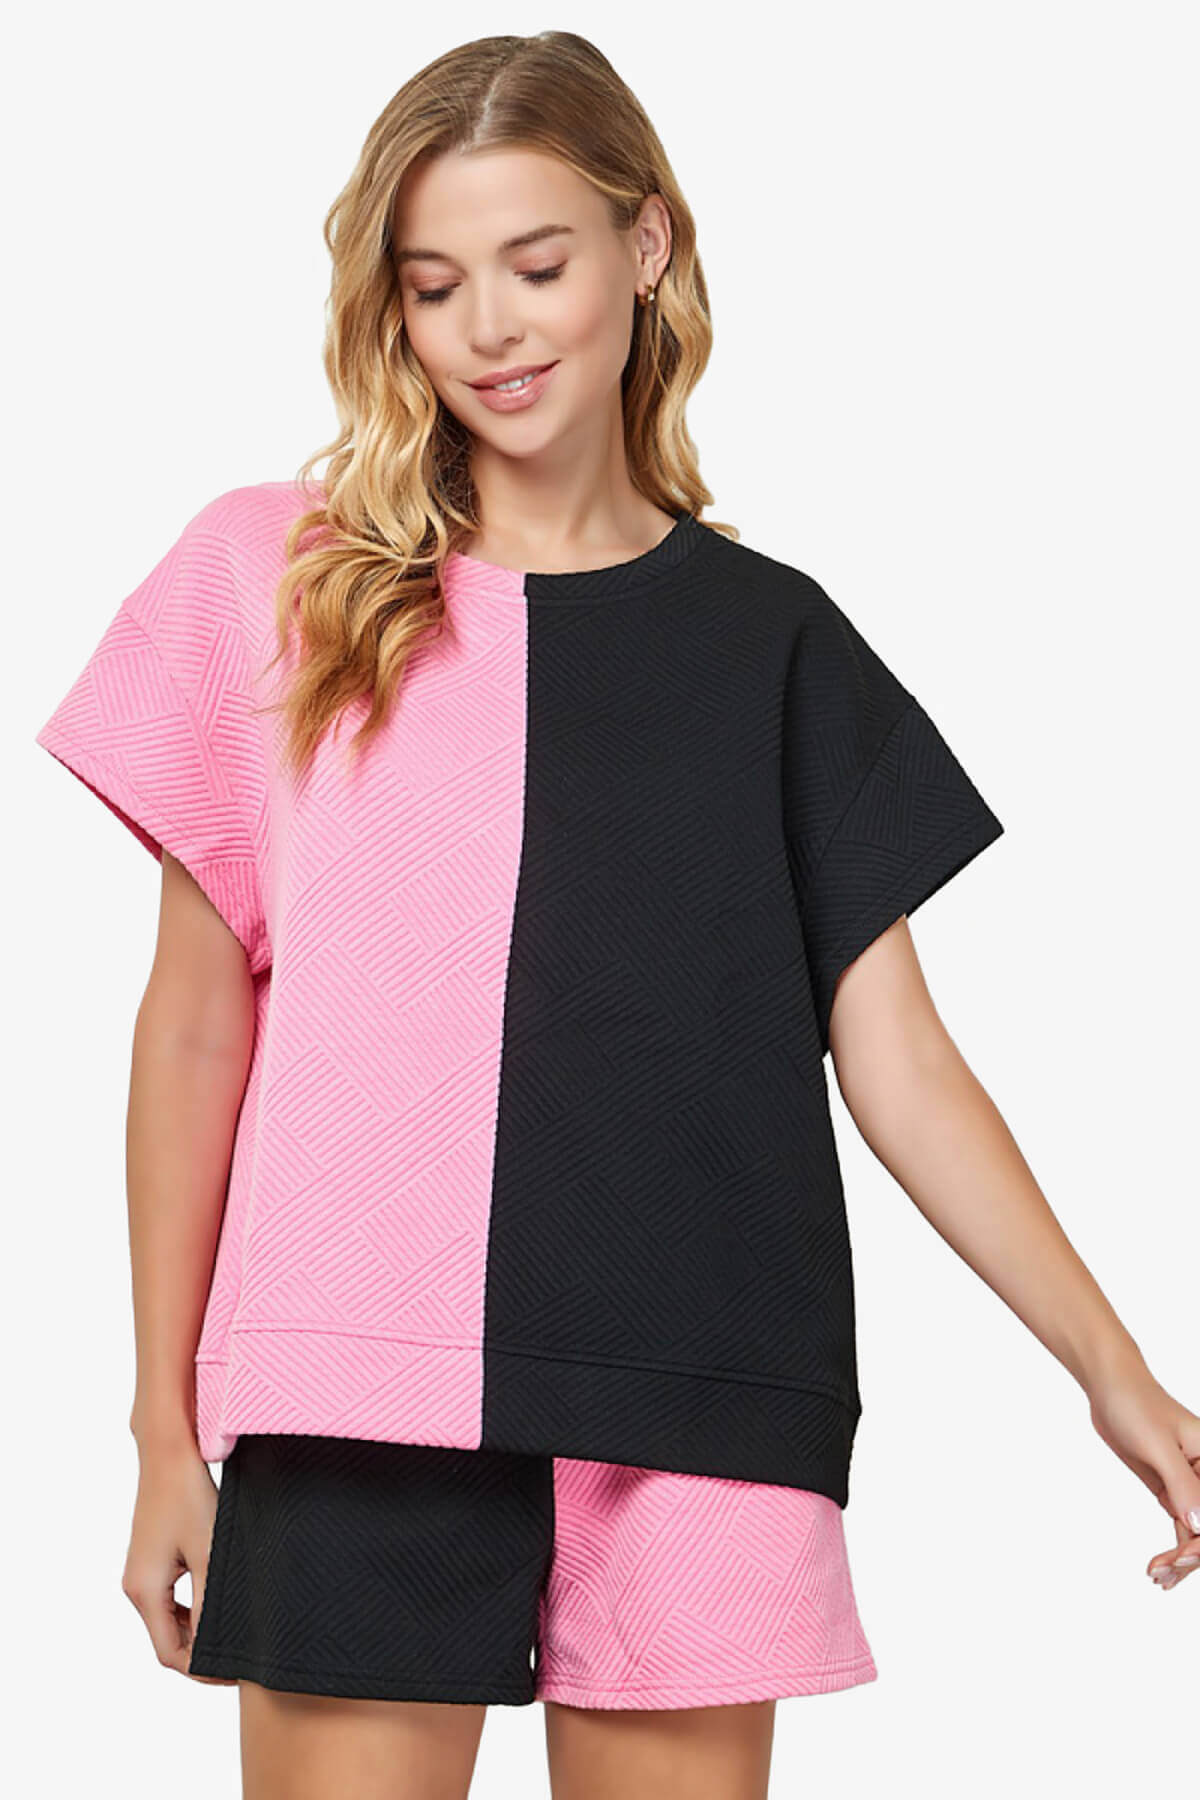 Lassy Textured Colorblock Short Sleeve Top BLACK AND PINK_1